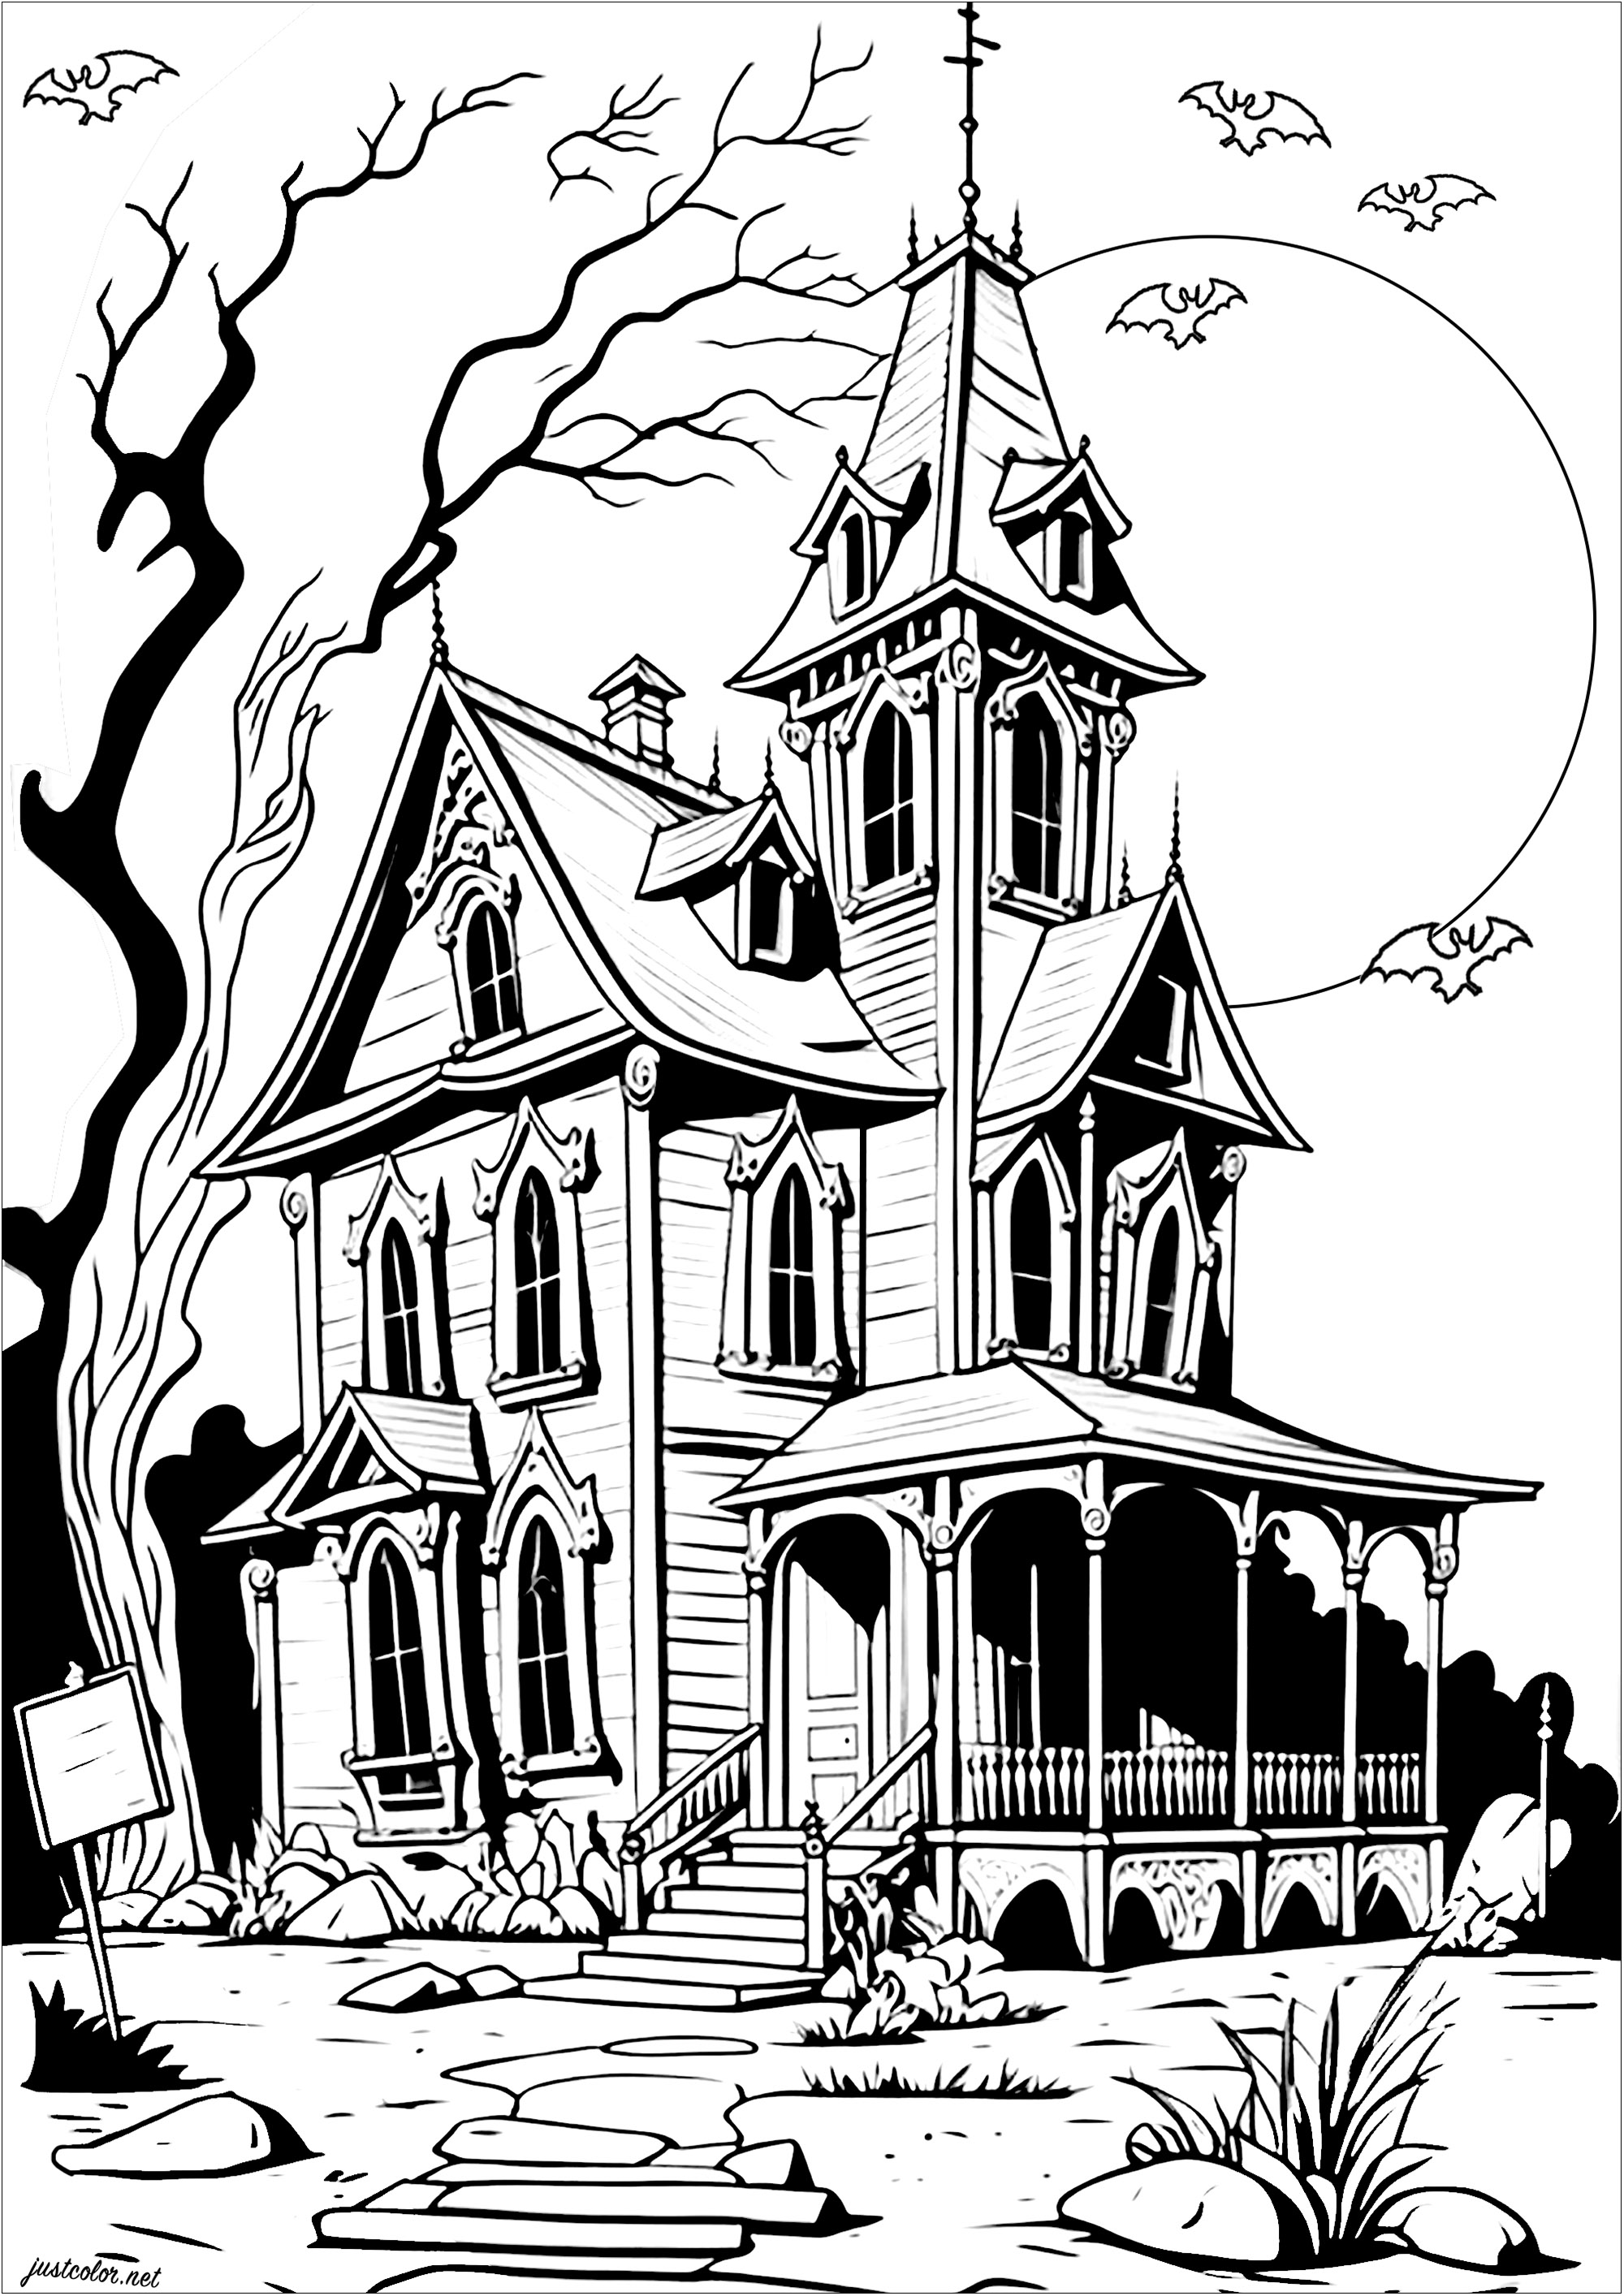 Haunted house coloring pages for adults Tyedupxx porn